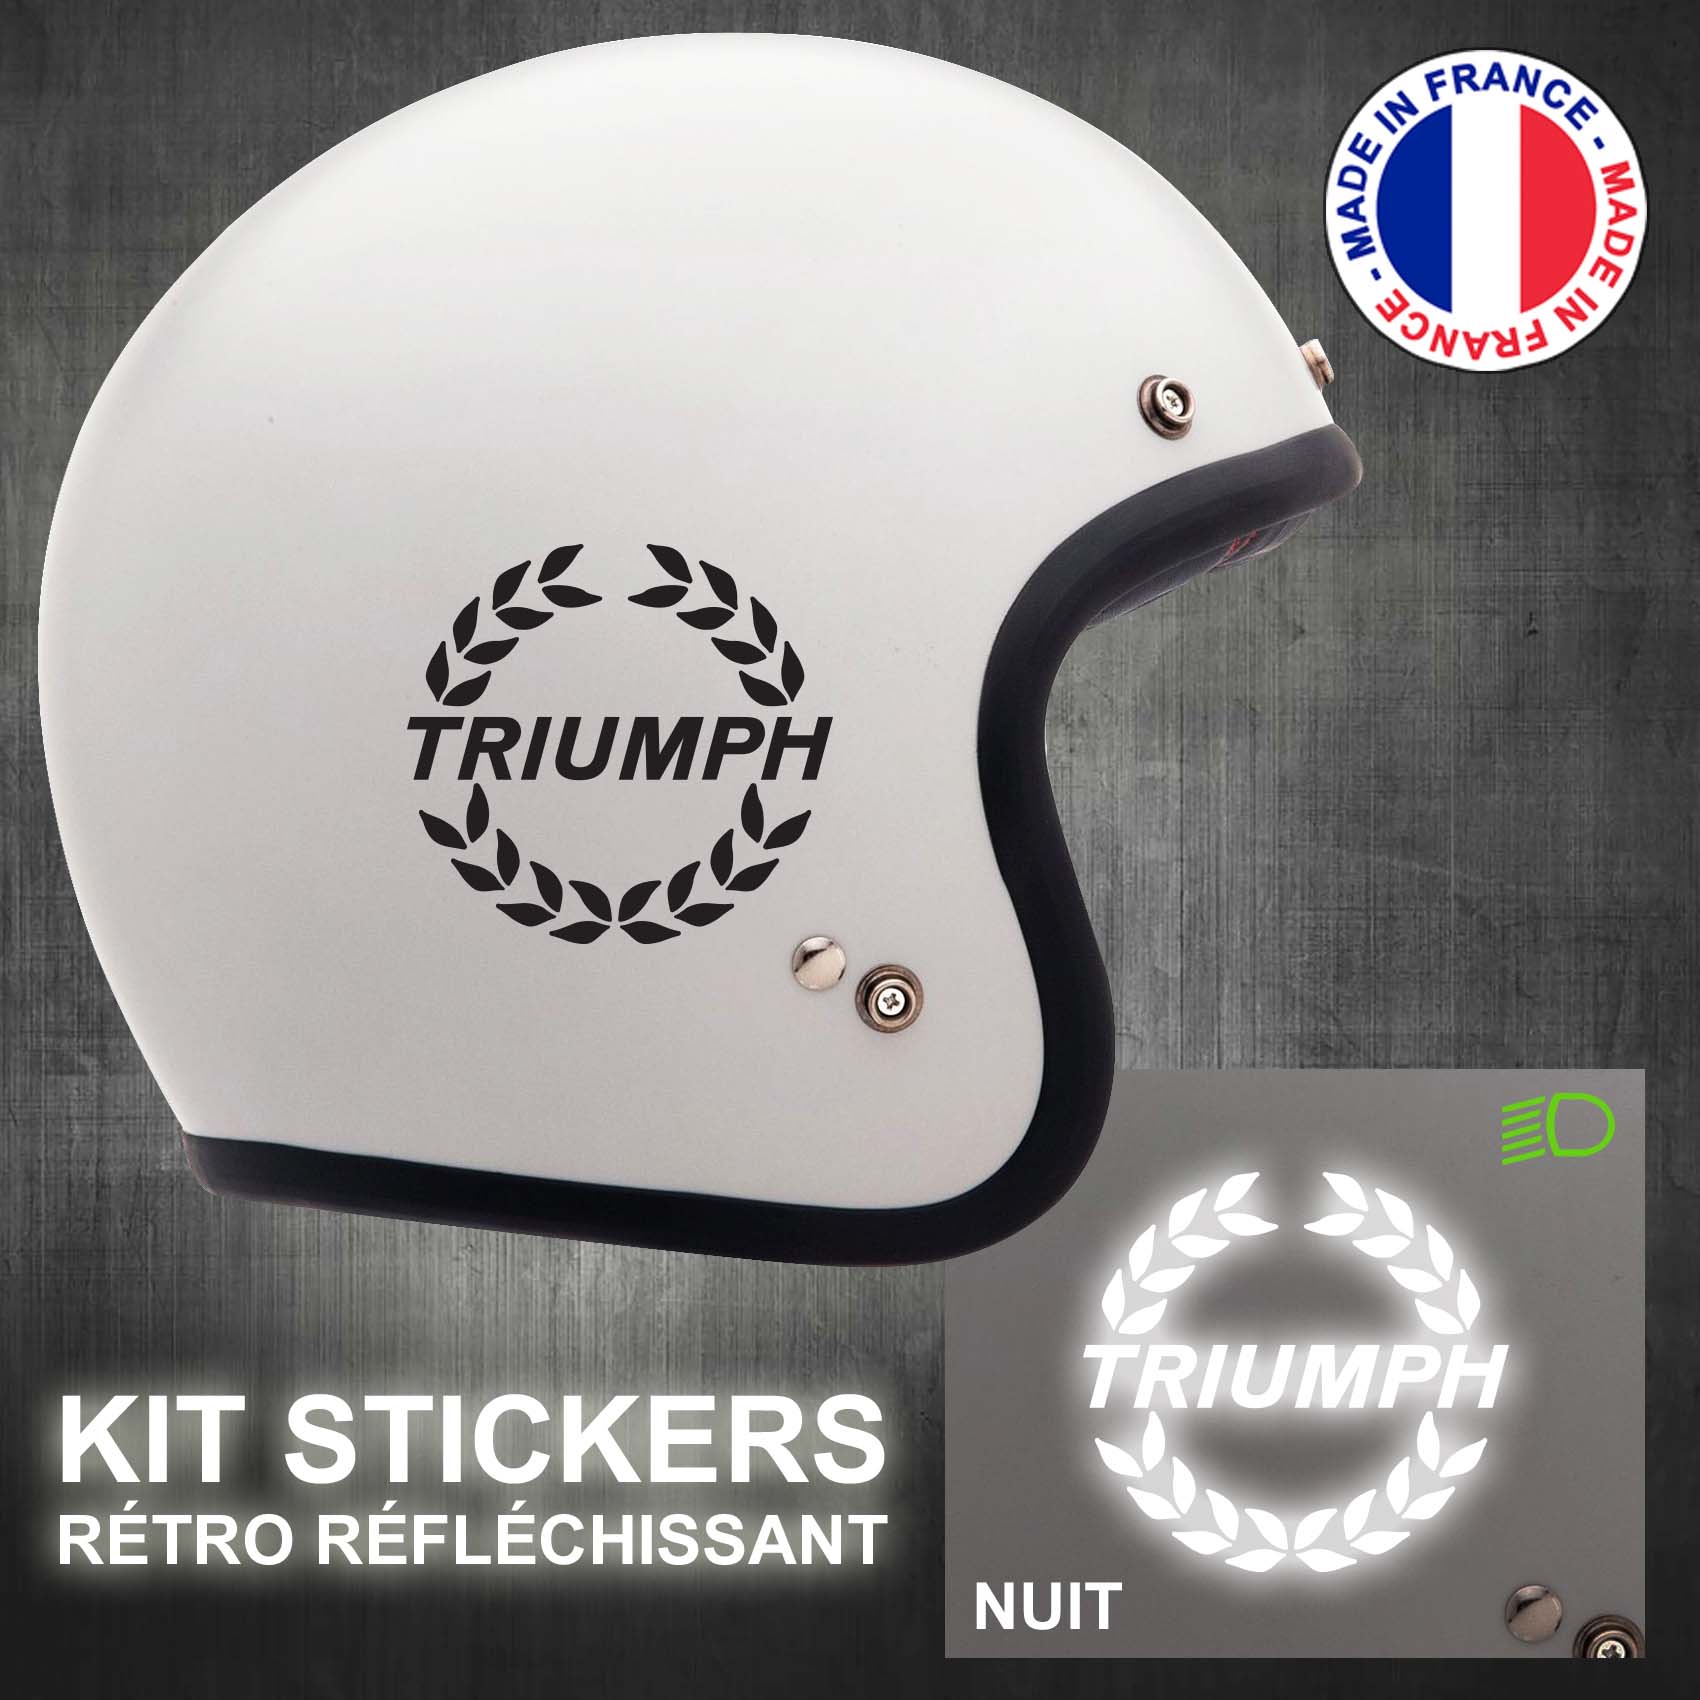 stickers-casque-moto-triumph-ref1-retro-reflechissant-autocollant-moto-velo-tuning-racing-route-sticker-casques-adhesif-scooter-nuit-securite-decals-personnalise-personnalisable-min